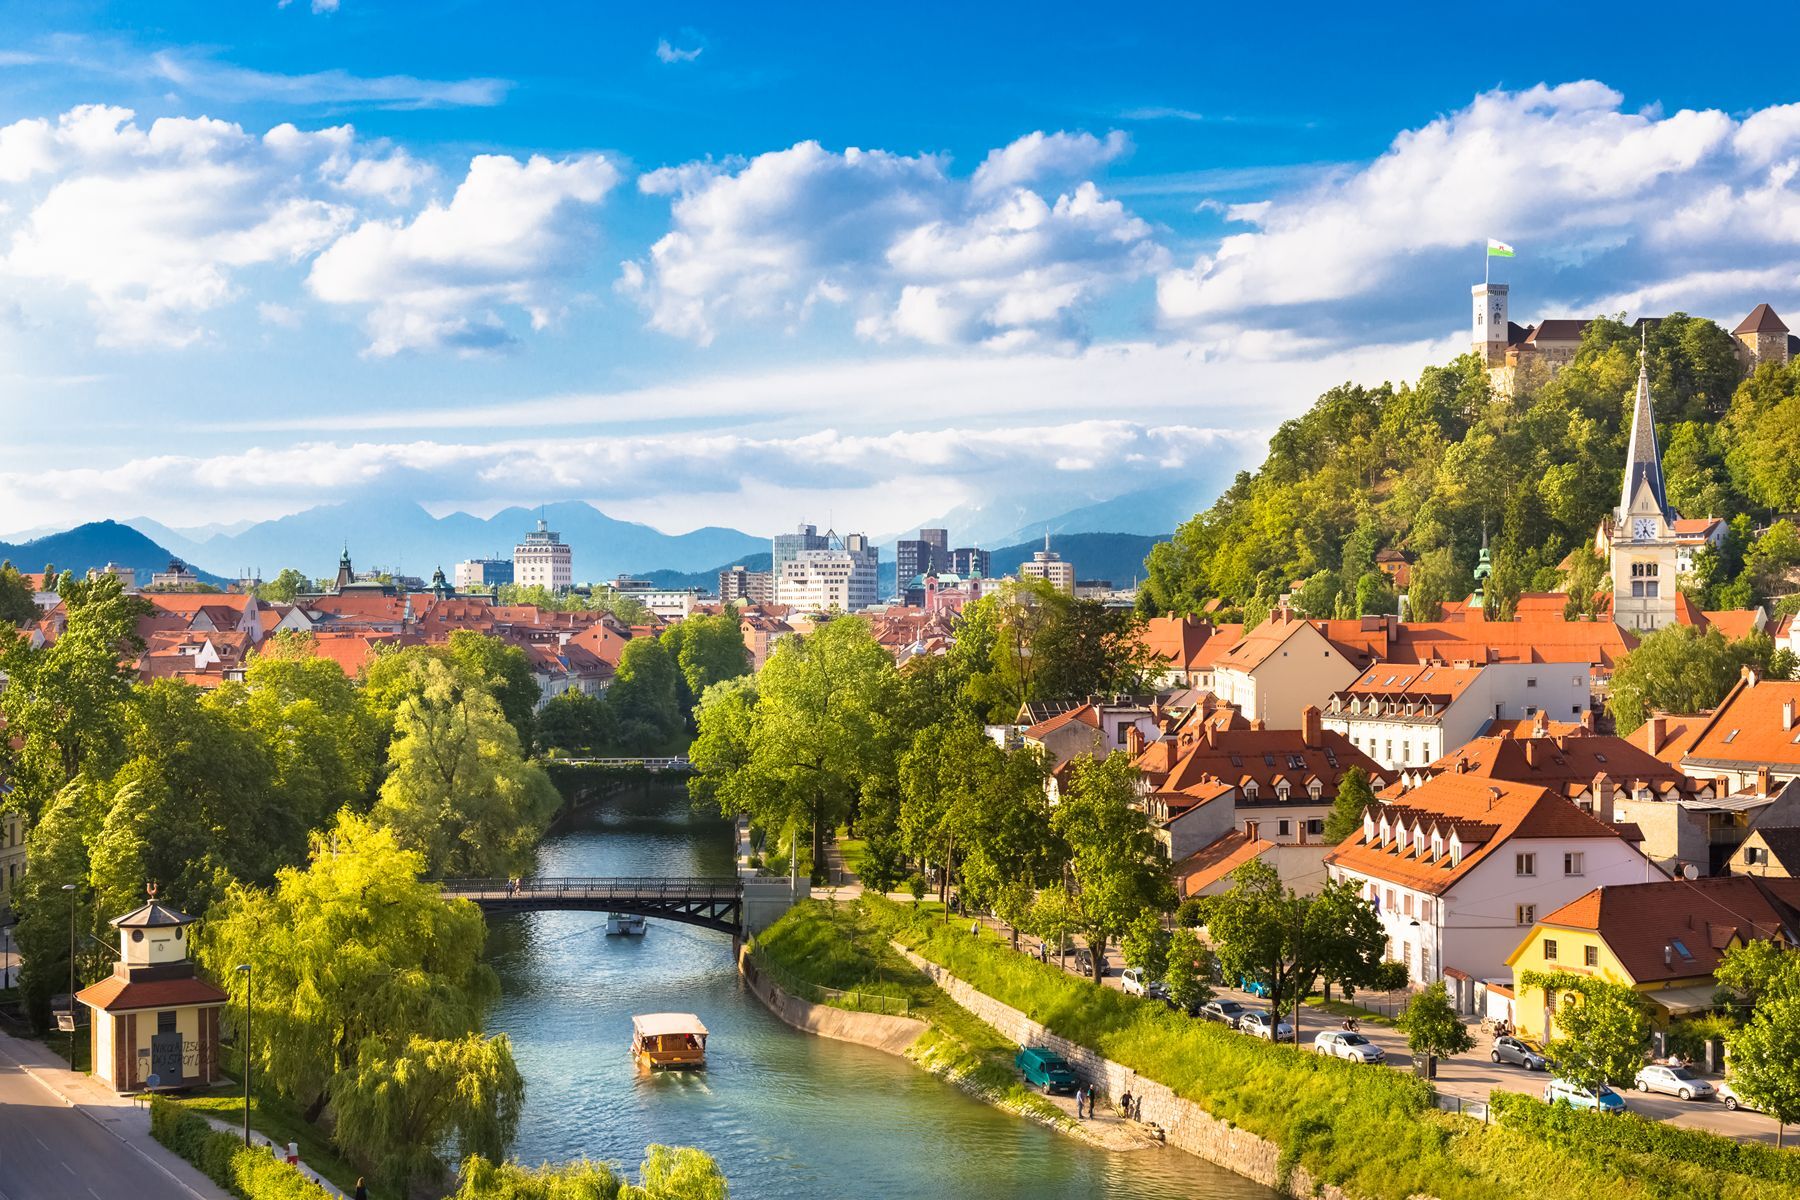 <p>Slovenia’s charming capital, <a href="https://www.visitljubljana.com/en/visitors/sights-and-activities/">Ljubljana</a>, is also known as the “city of dragons,” thanks to the many dragon symbols and icons that adorn its picturesque streets. Among the spots you won’t want to miss, we recommend visiting the magnificent Ljubljana Castle, strolling along the Ljubljanica River, making a stop at Tivoli Park and taking a coffee break in Prešeren Square. With its rich history and lively atmosphere, Ljubljana is perfect for travellers who love cultural monuments, as they can spend time exploring its Roman ruins and Baroque architecture. </p>